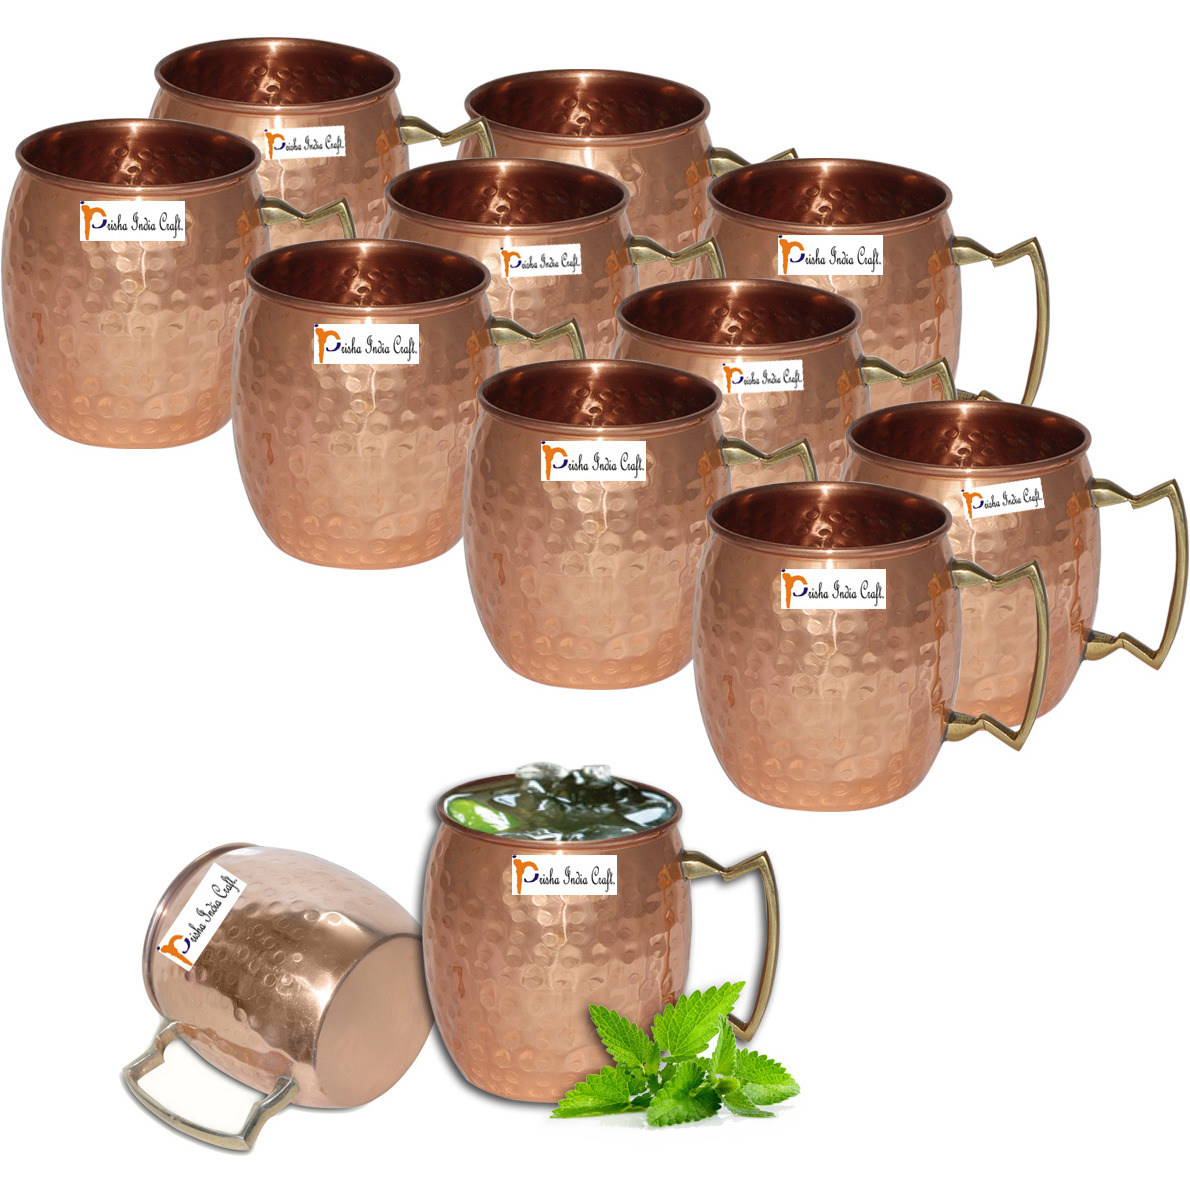 Set of 12 - Prisha India Craft B. Moscow Mule Solid Copper Mug 550 ML / 18 oz - 100% Pure Copper Hammered Best Quality Lacquered Finish, Cocktail Cup, Copper Mugs, Cocktail Mugs with No Inner Linings